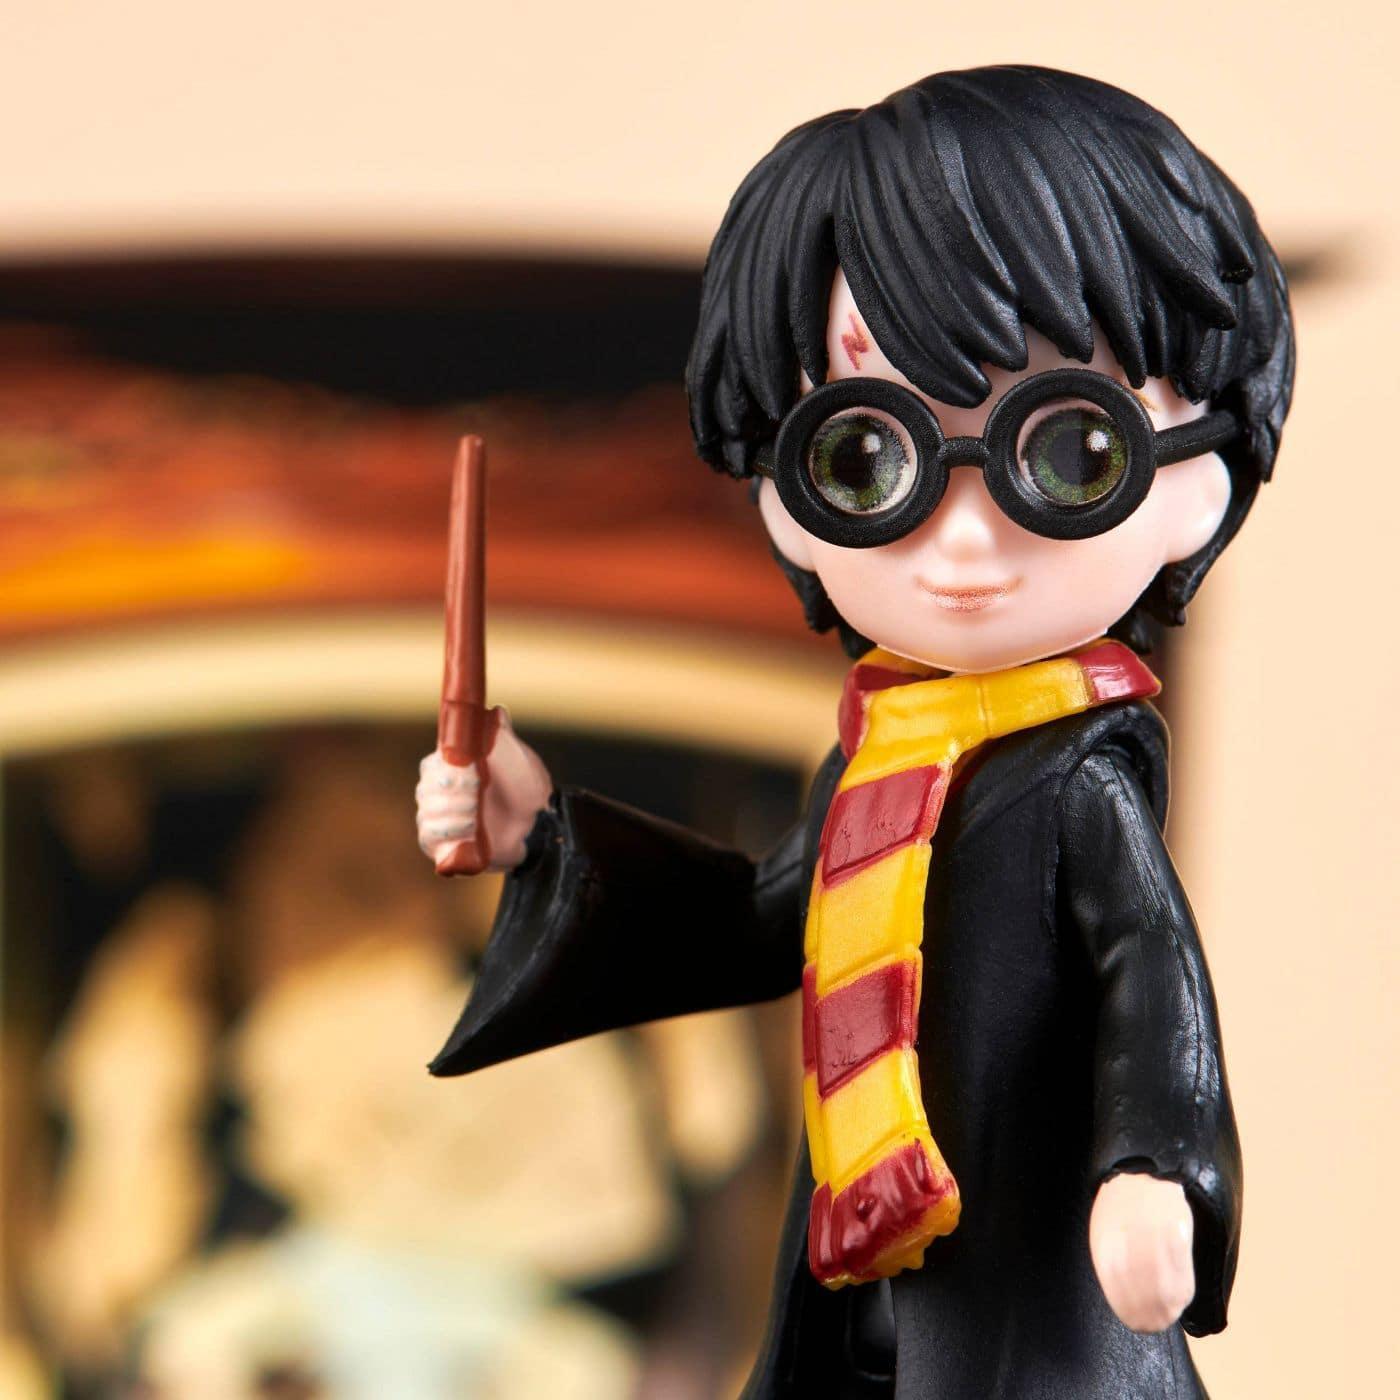 Magical Minis Harry Potter The Wizarding World of 3